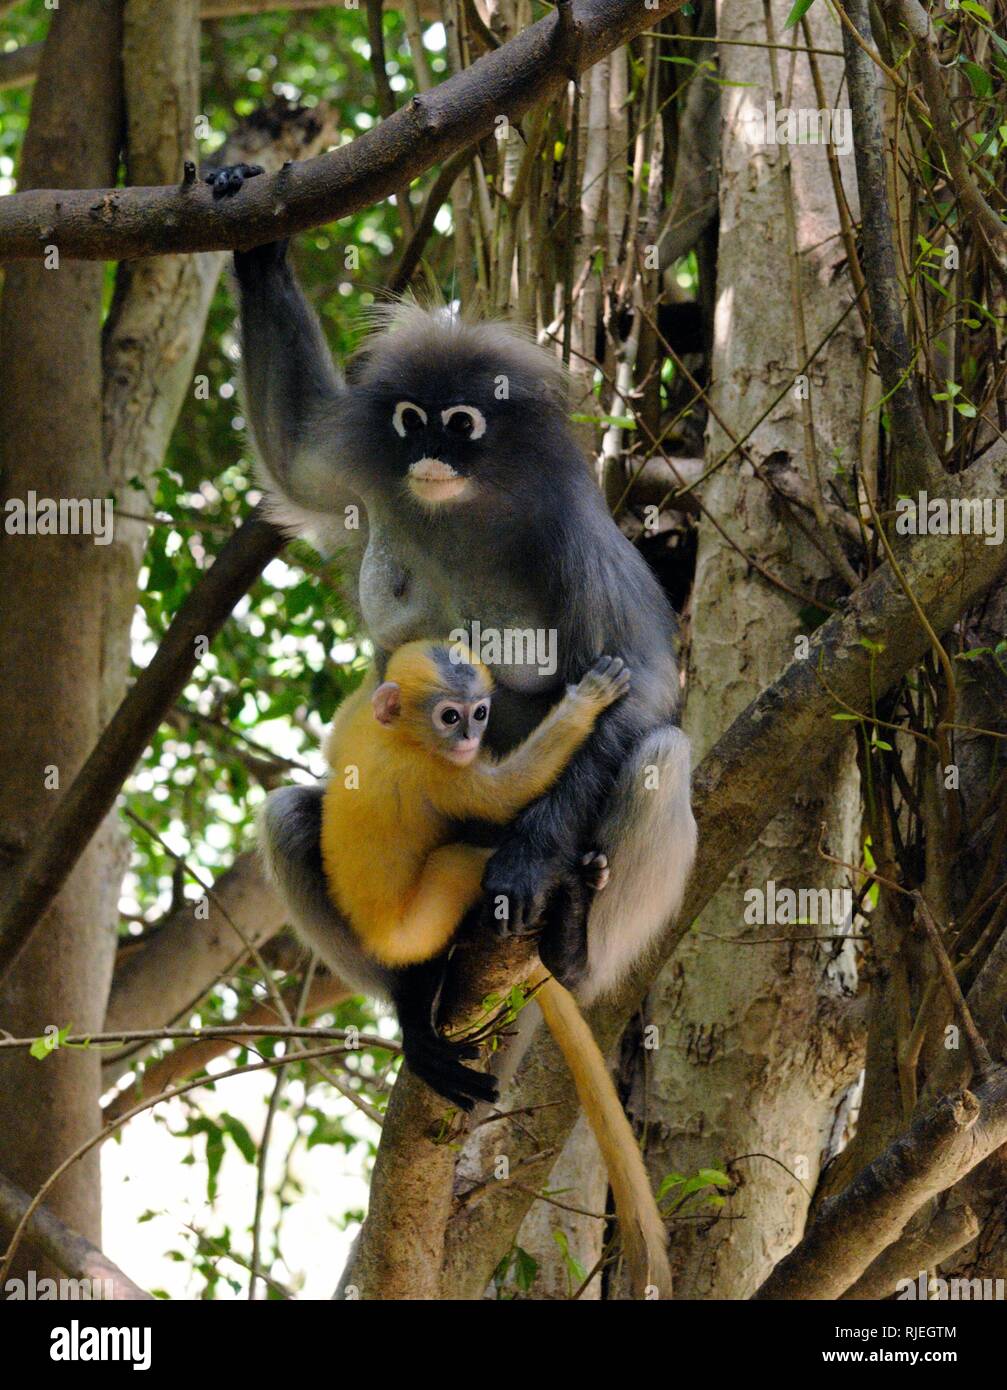 Female dusky langur, dusky leaf monkey, spectacled langur, (Trachypithecus obscurus) with yellow baby monkey in forest in Thailand Stock Photo